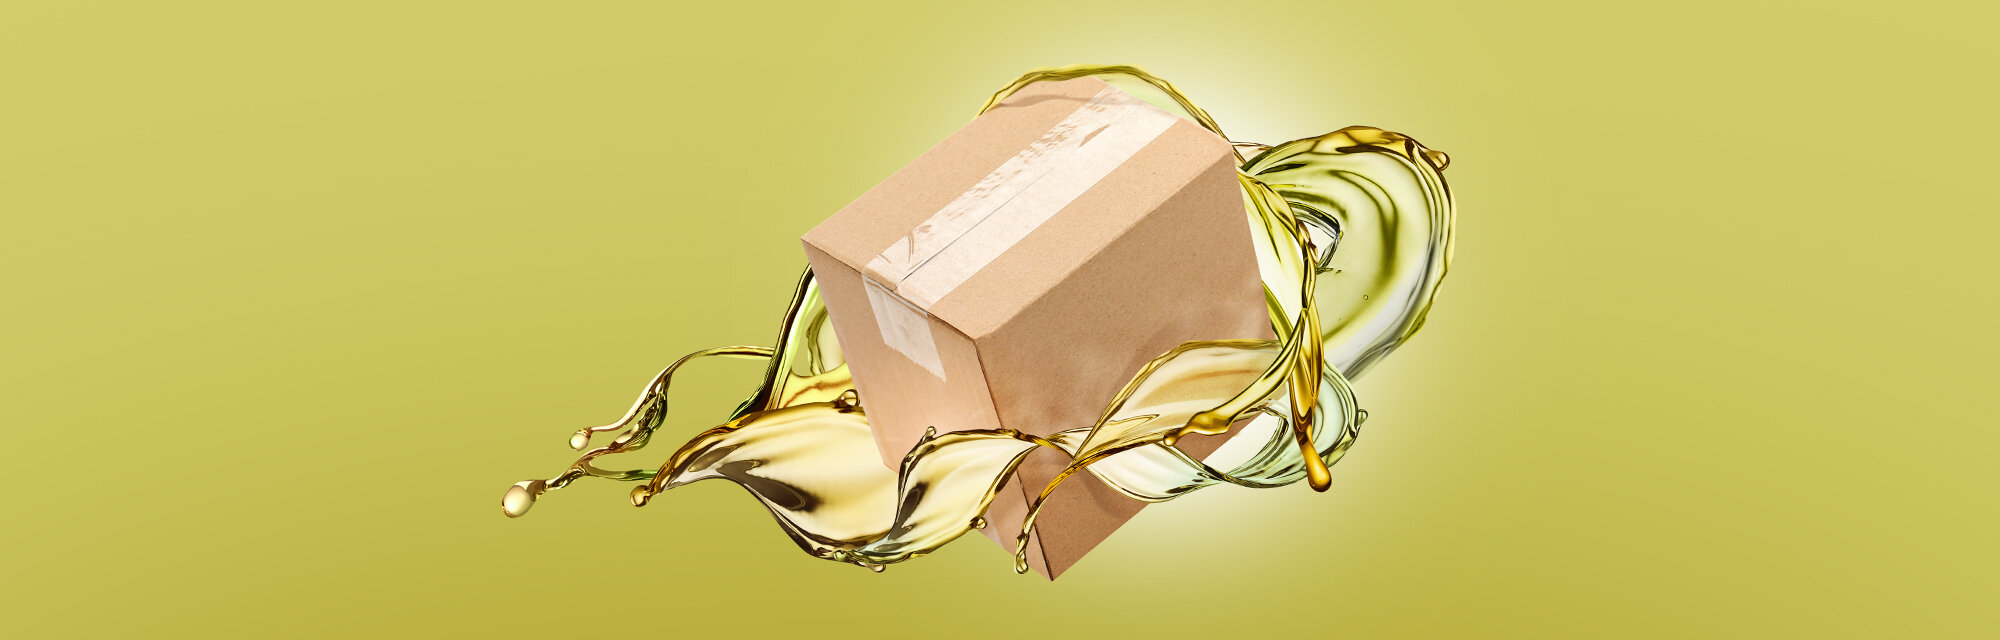 Key visual from artimelt for the packaging sector